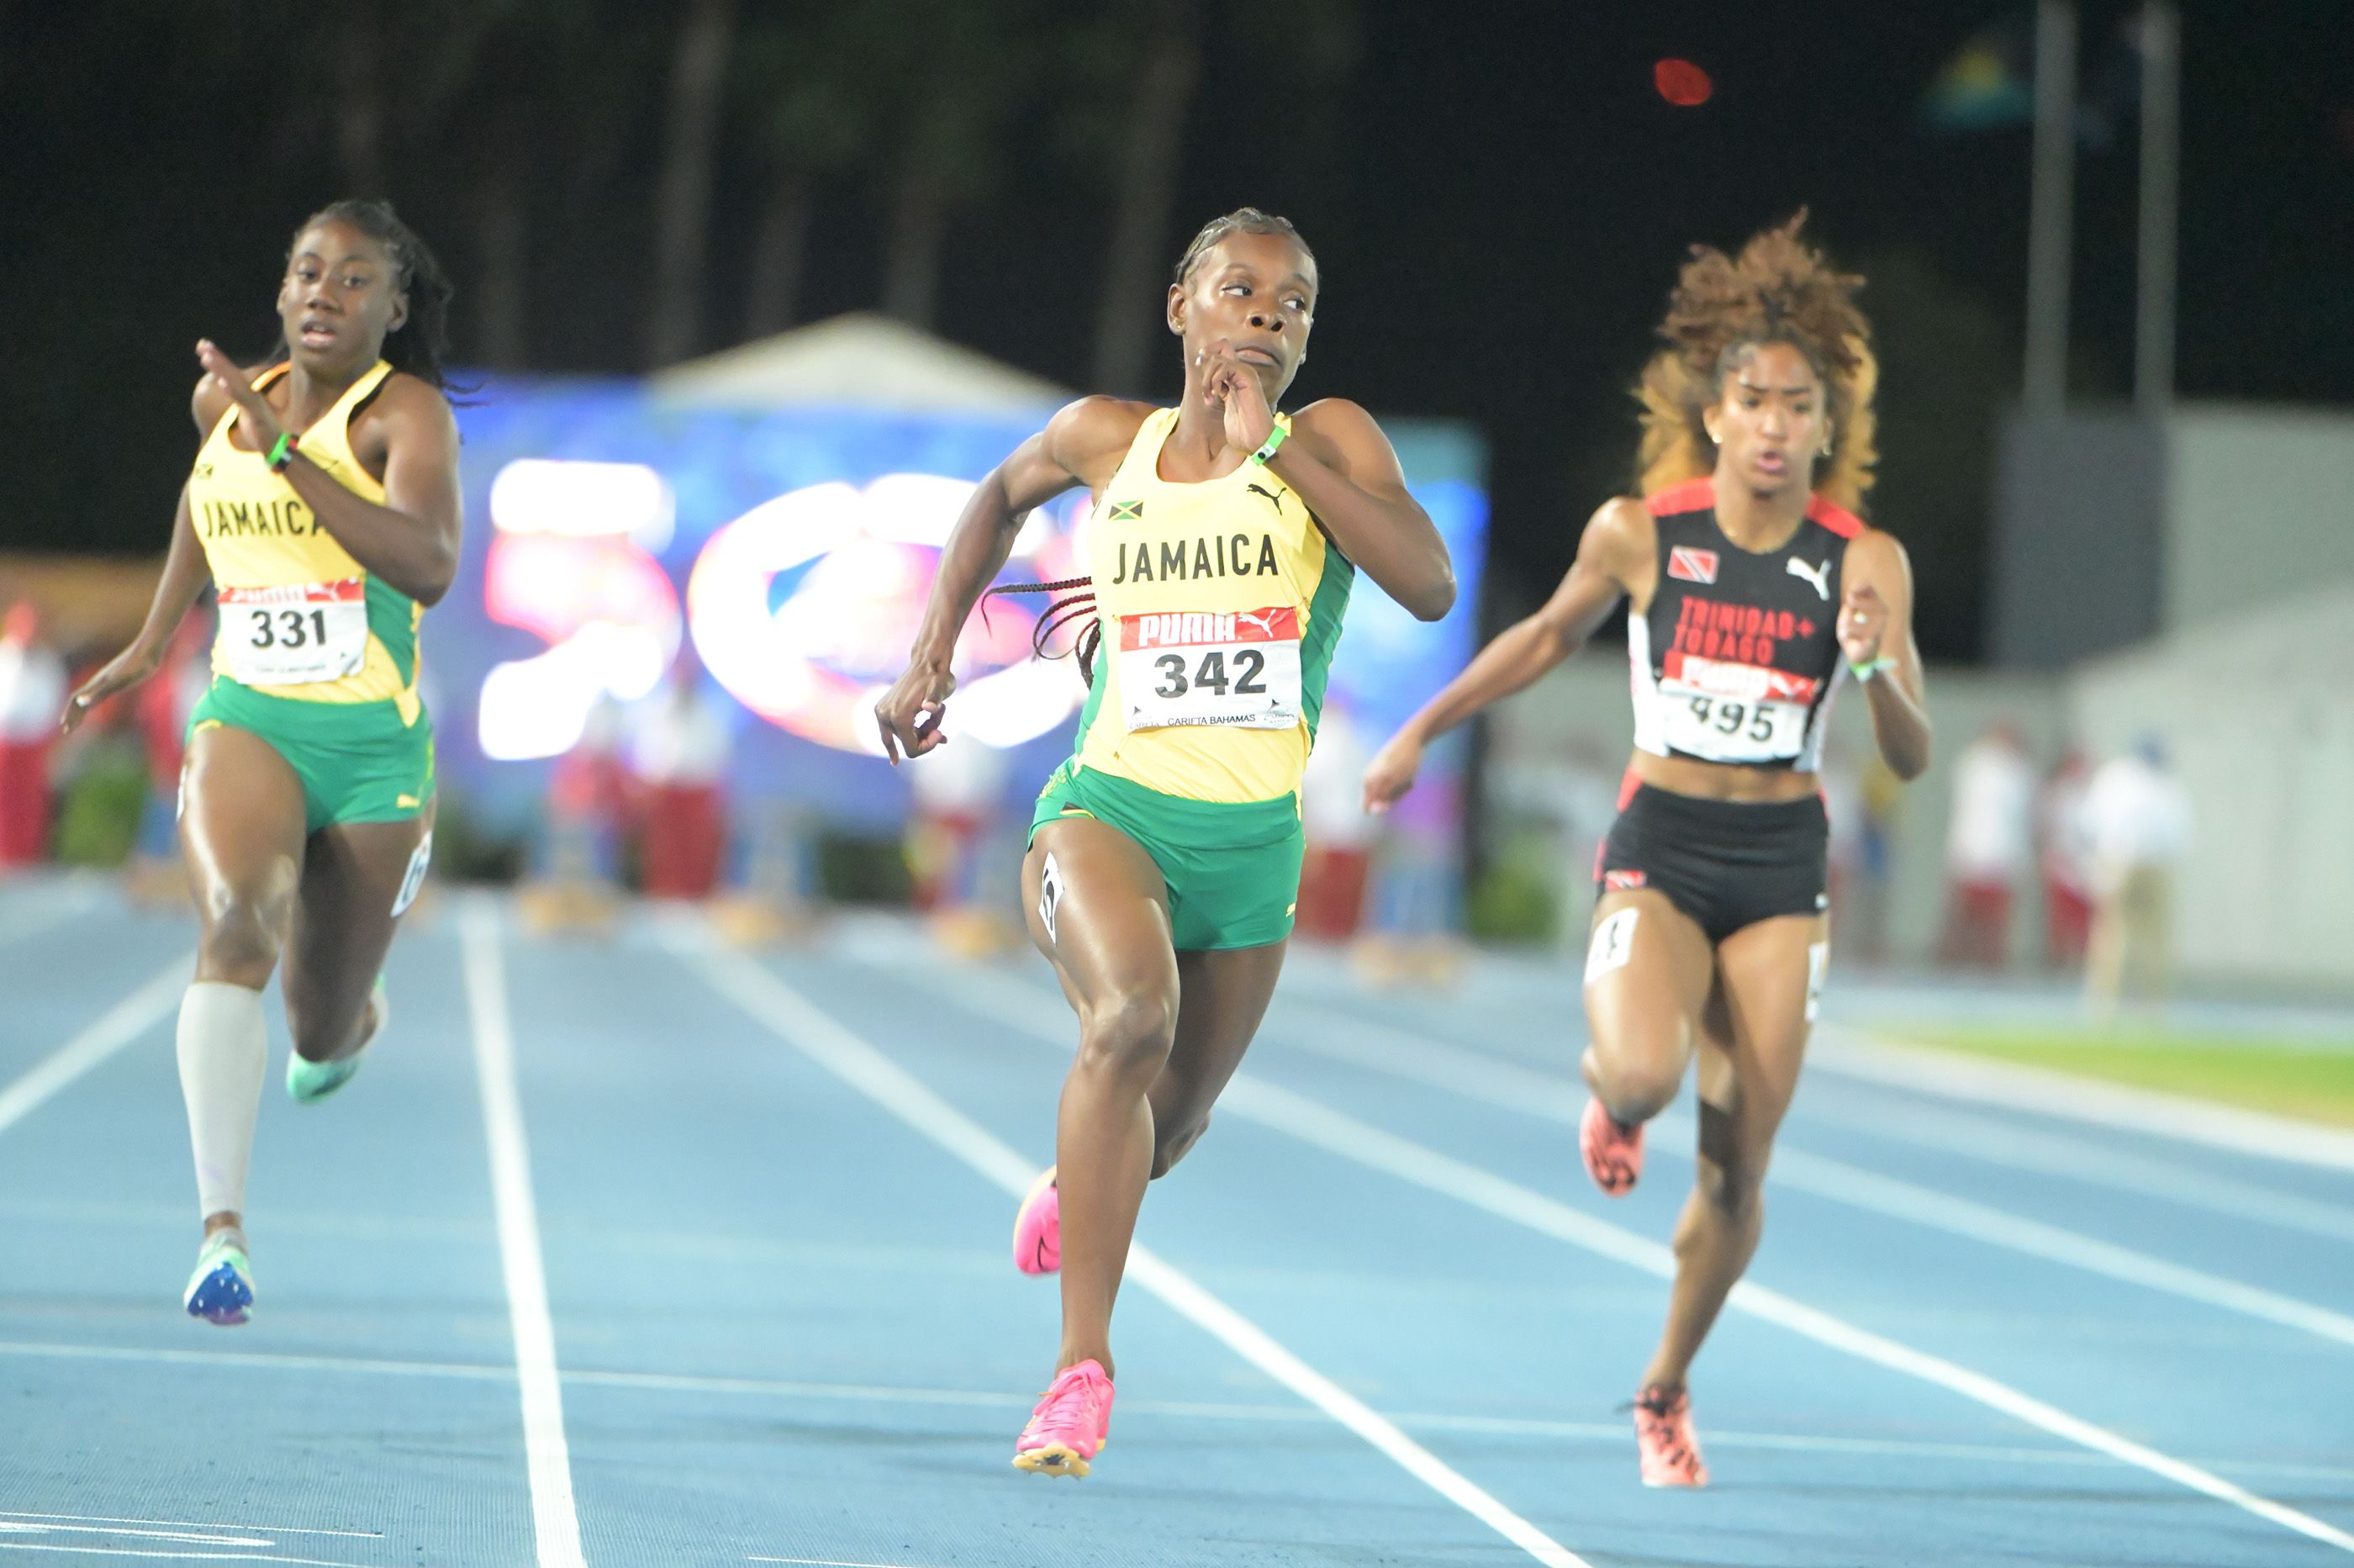 Jamaica's Alana Reid on her way to a win in the 100m